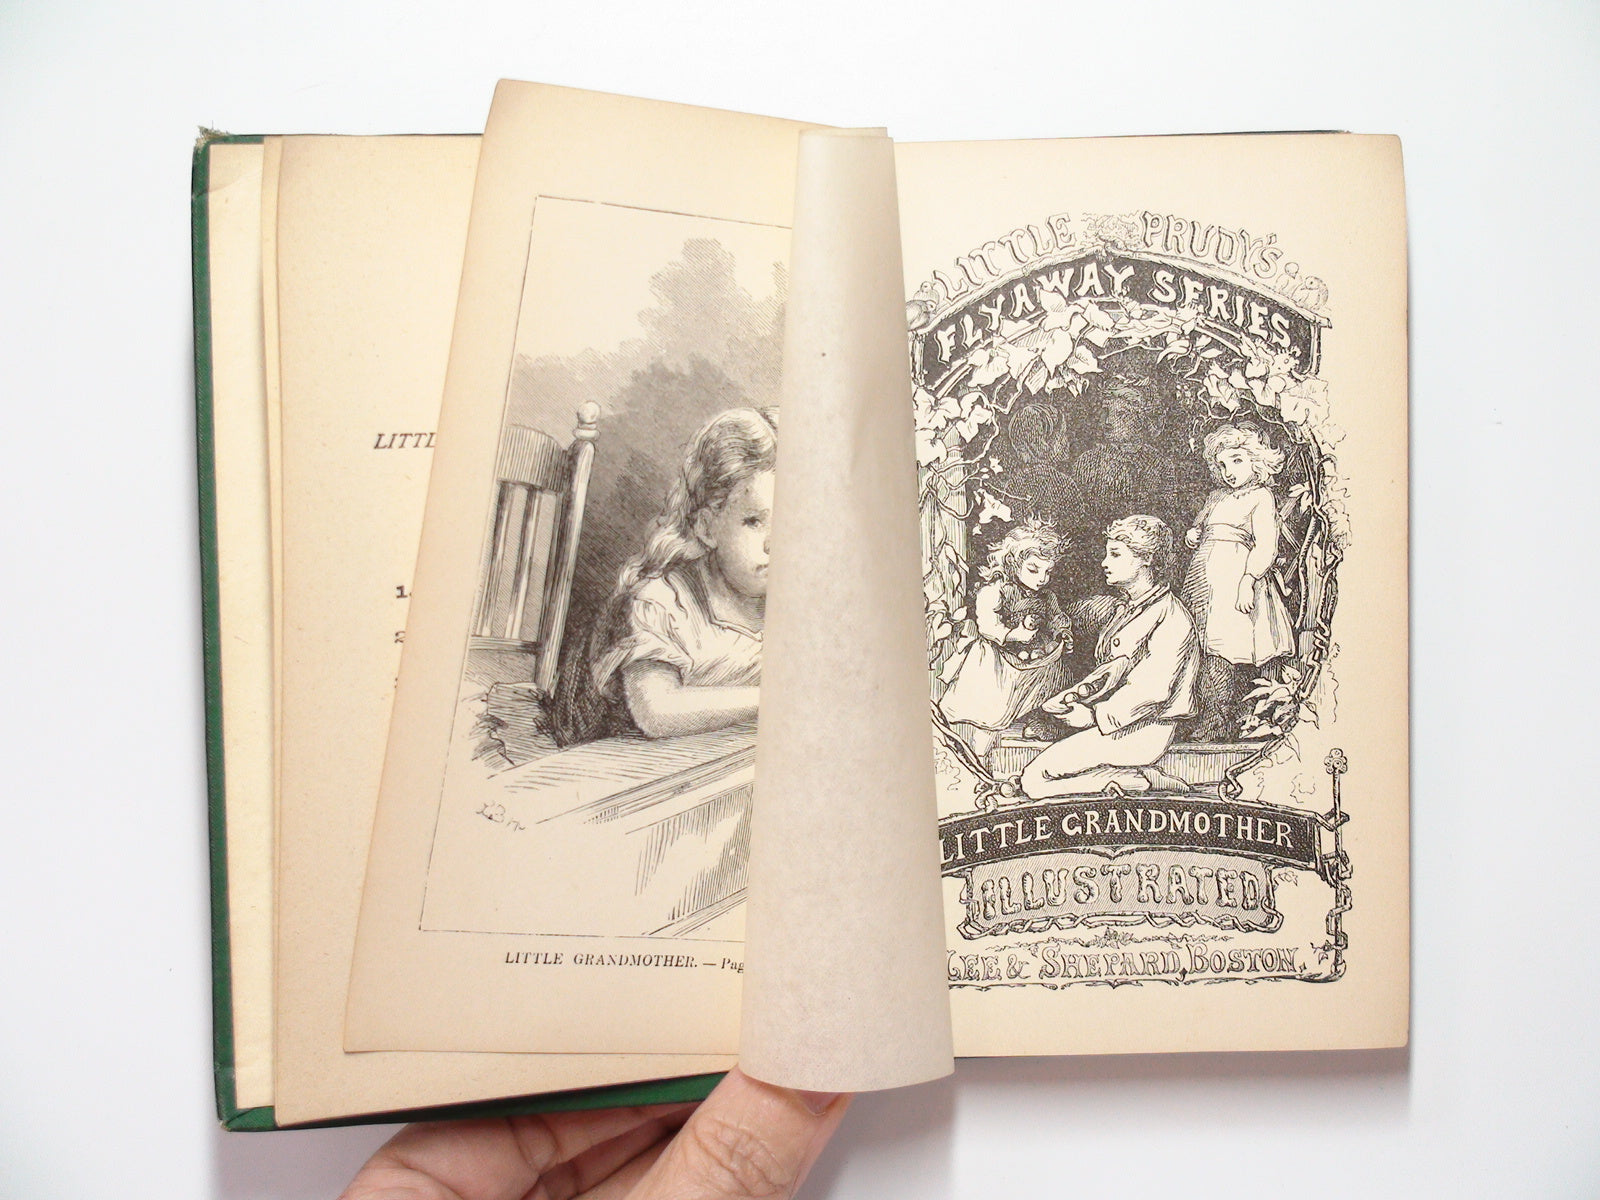 Little Grandmother, Little Prudy's Flyaway Series, 1st Ed, by Sophie May, 1870